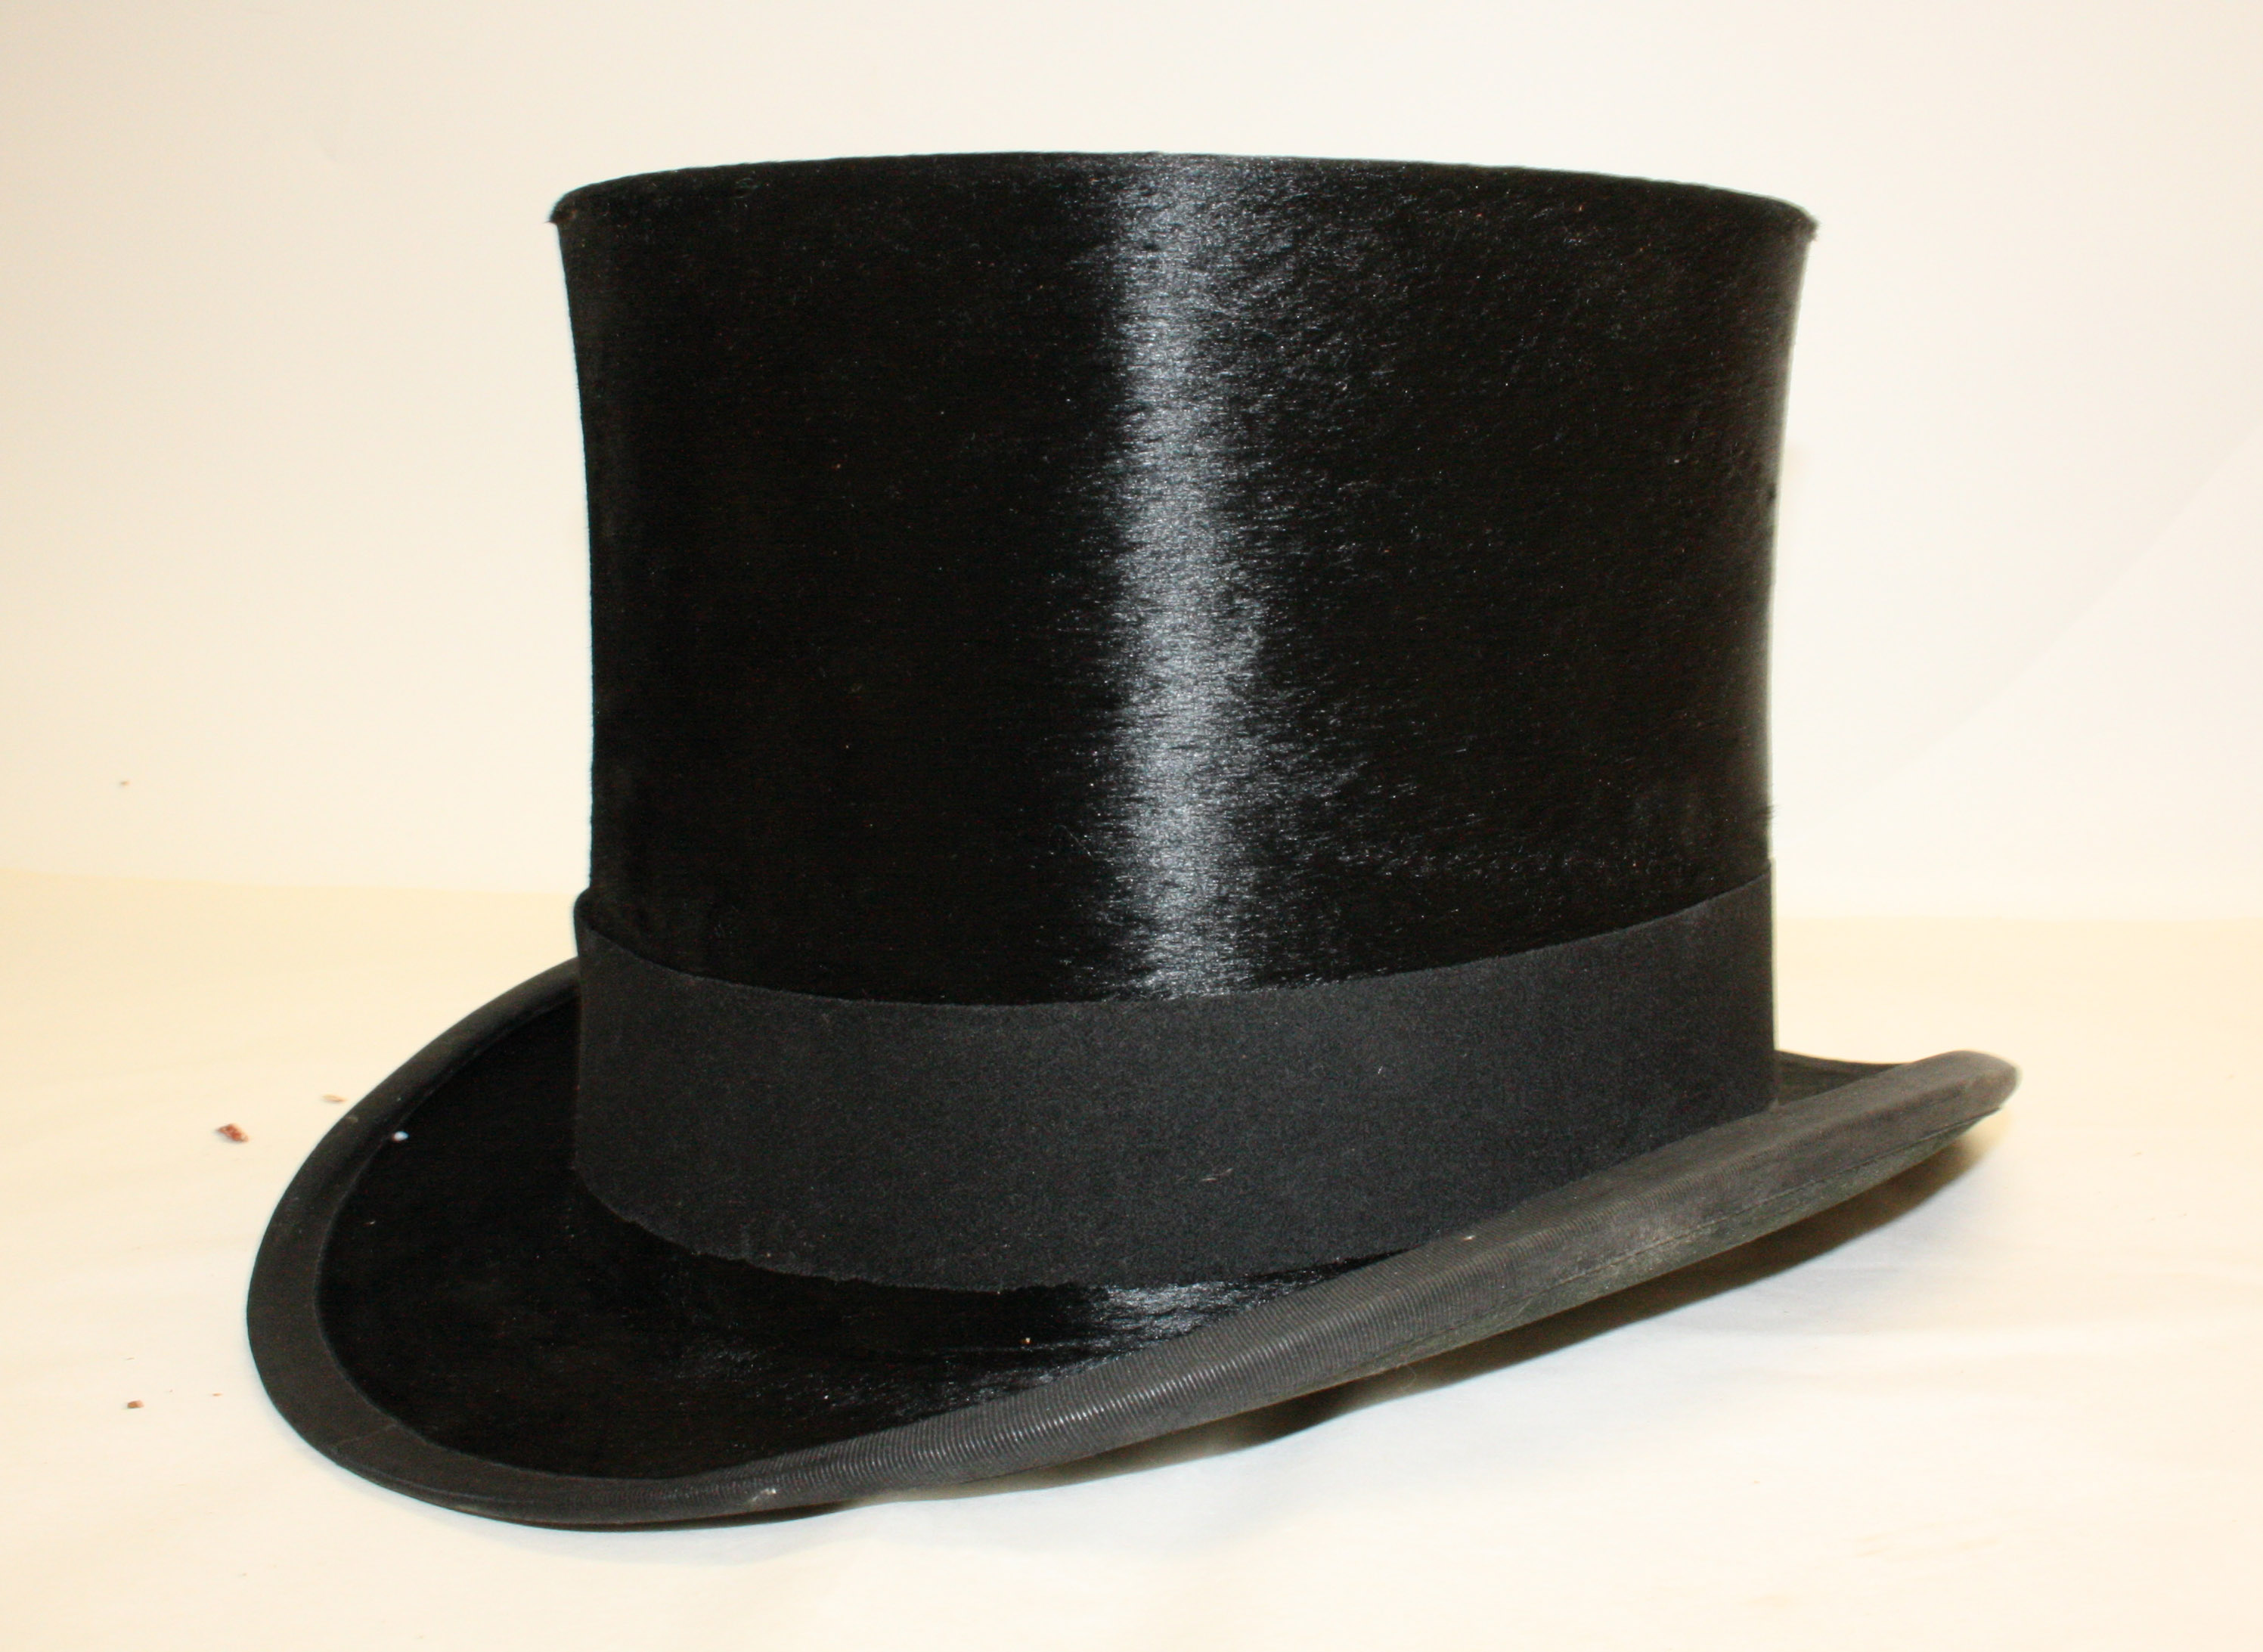 Edwardian top hat with potential chemicals